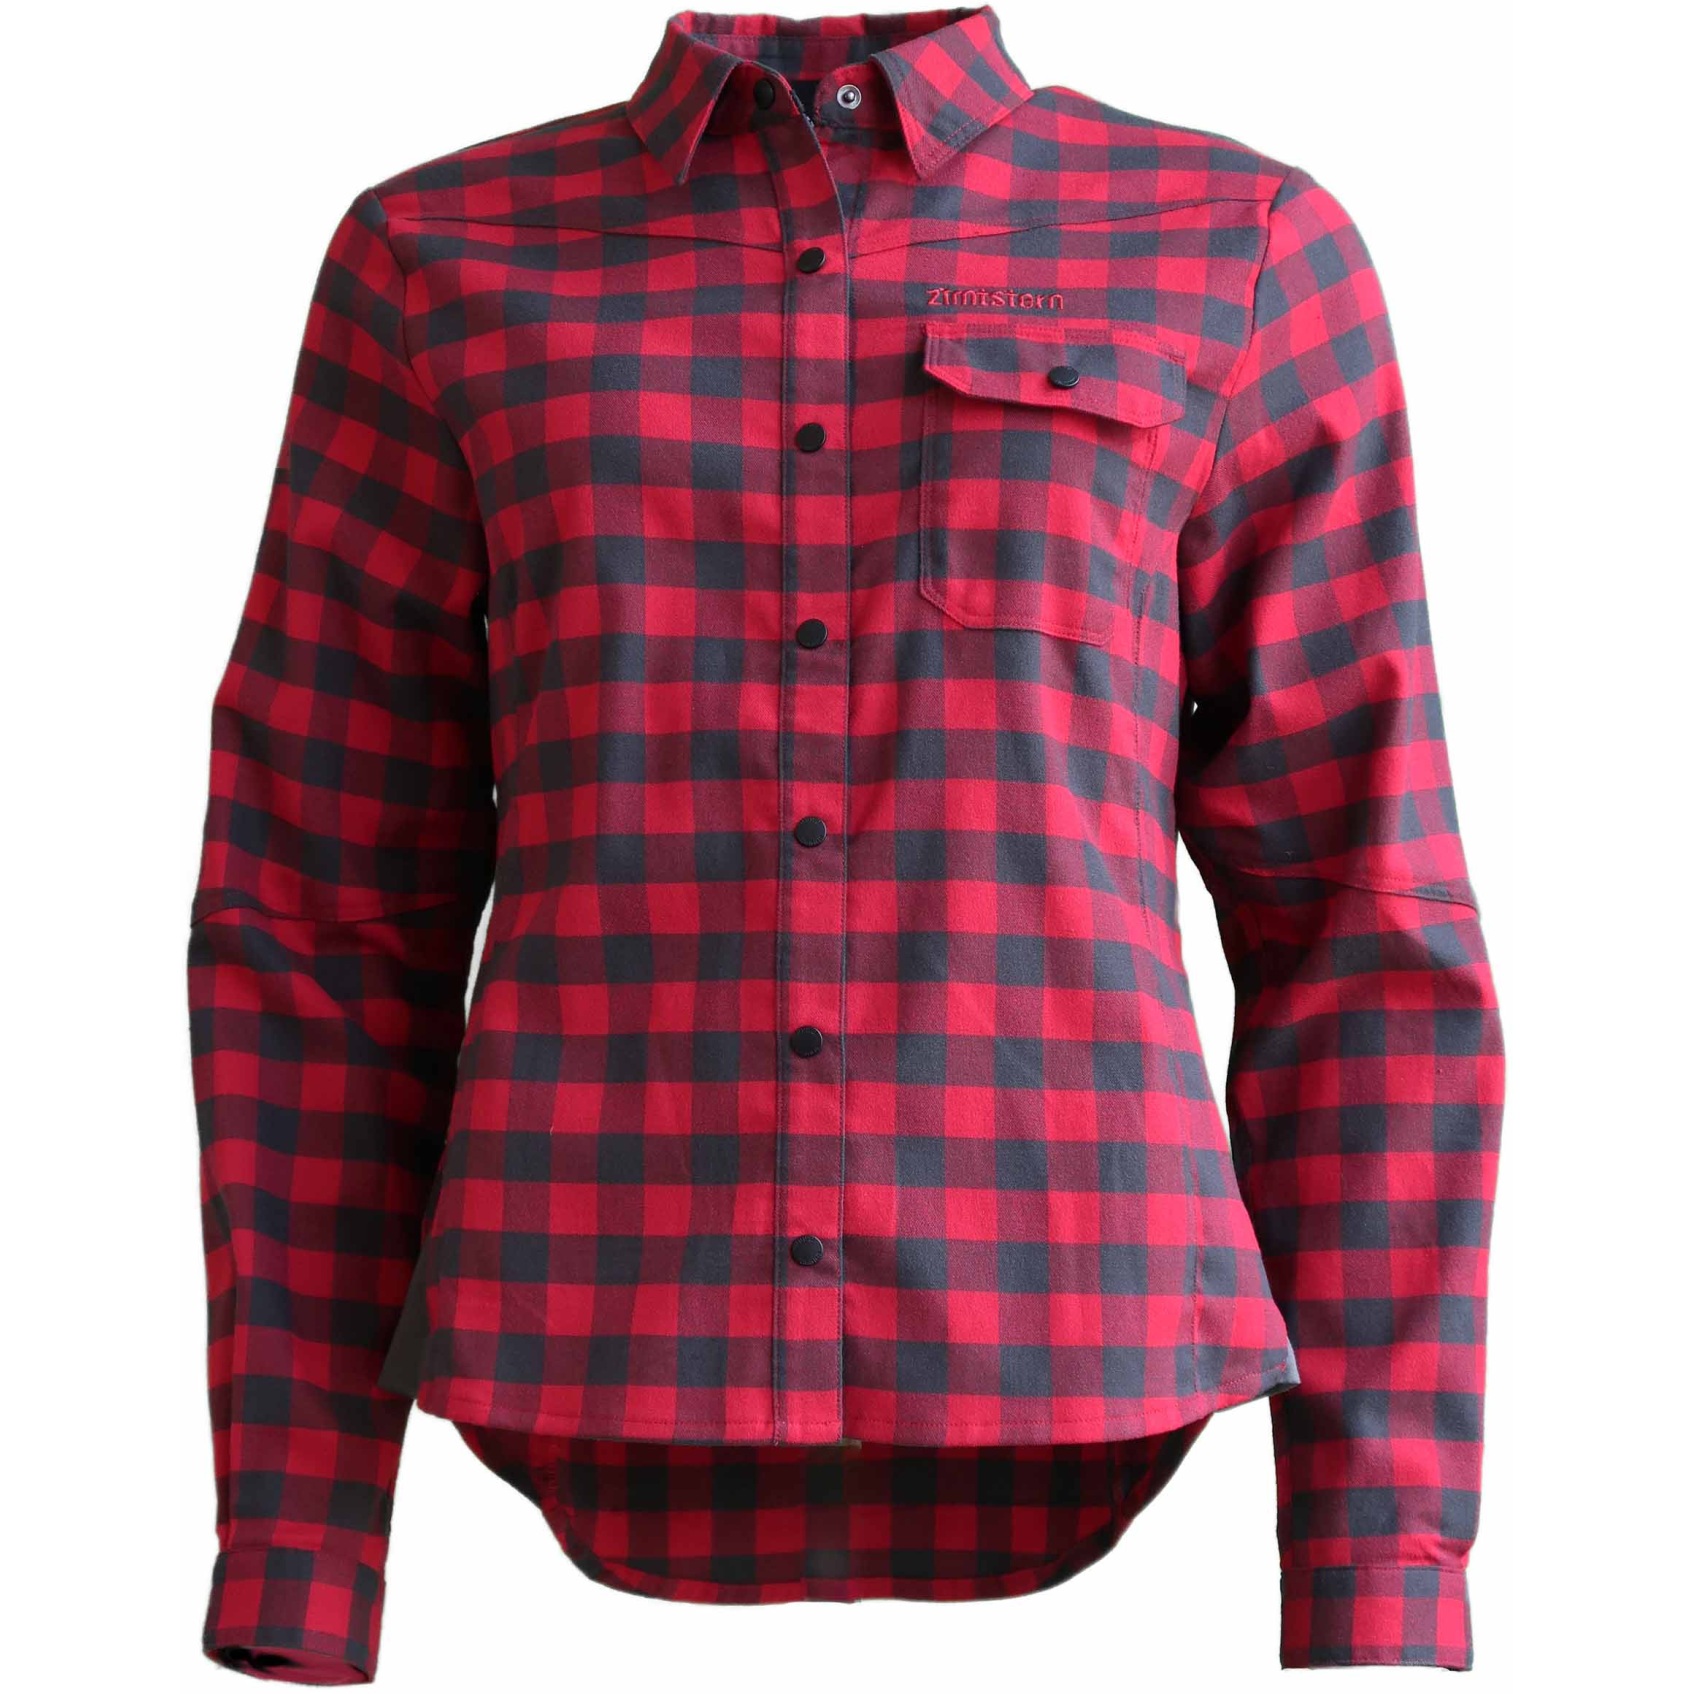 Picture of Zimtstern Timbaz Longsleeve Flannel-Shirt Women - Jester Red/Pirate Black